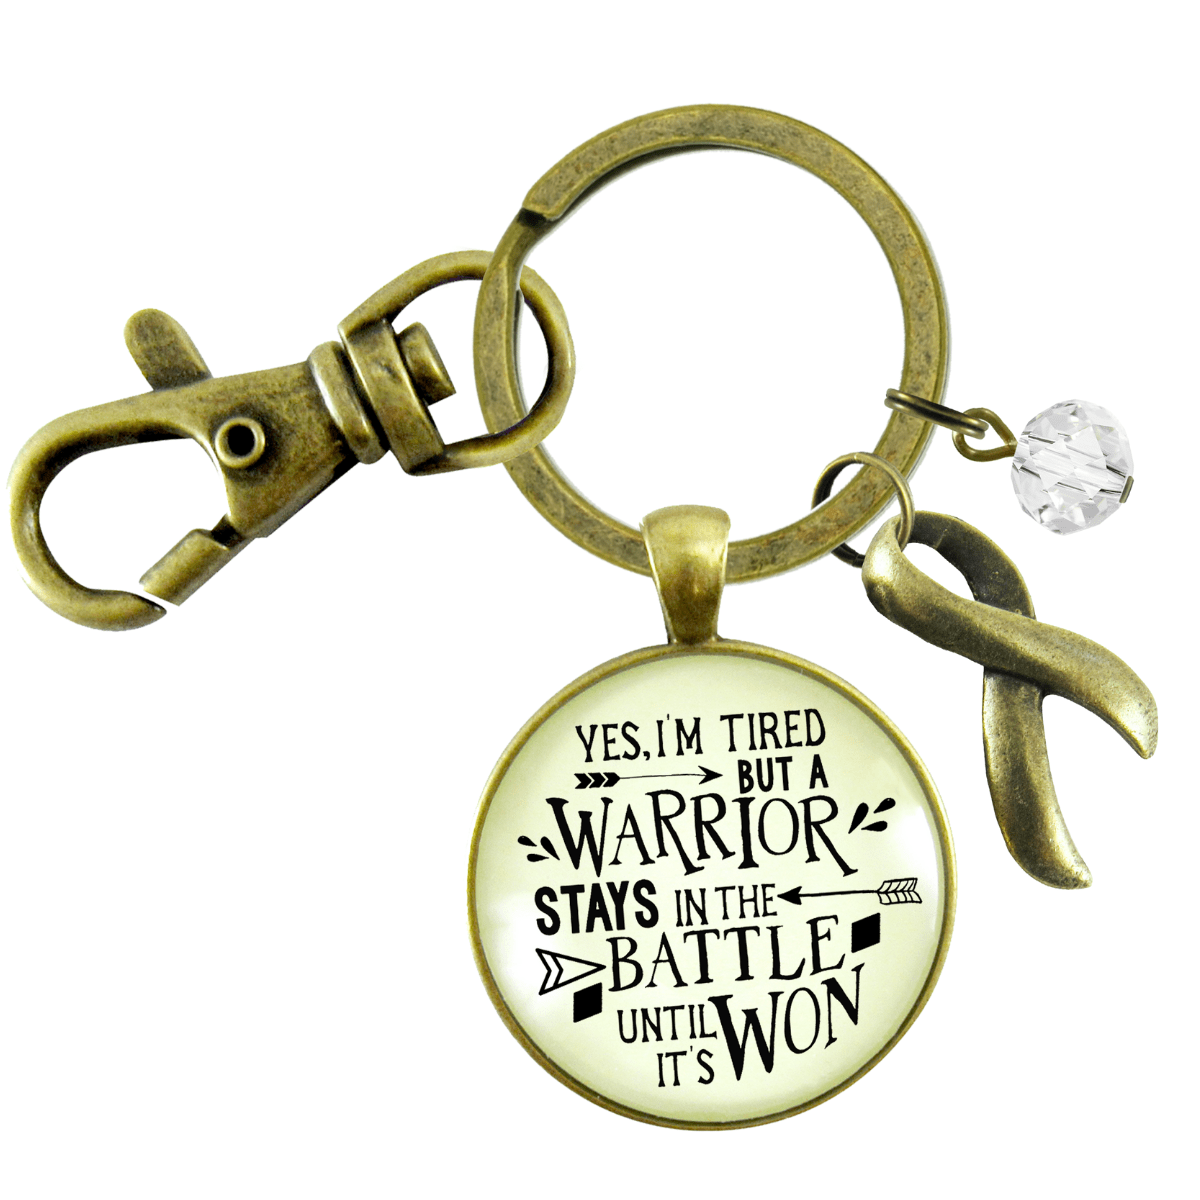 Survivor Keychain Yes I Am Tired Warrior Strong women Bold Life Message Jewelry Ribbon - Gutsy Goodness Handmade Jewelry;Survivor Keychain Yes I Am Tired Warrior Strong Women Bold Life Message Jewelry Ribbon - Gutsy Goodness Handmade Jewelry Gifts